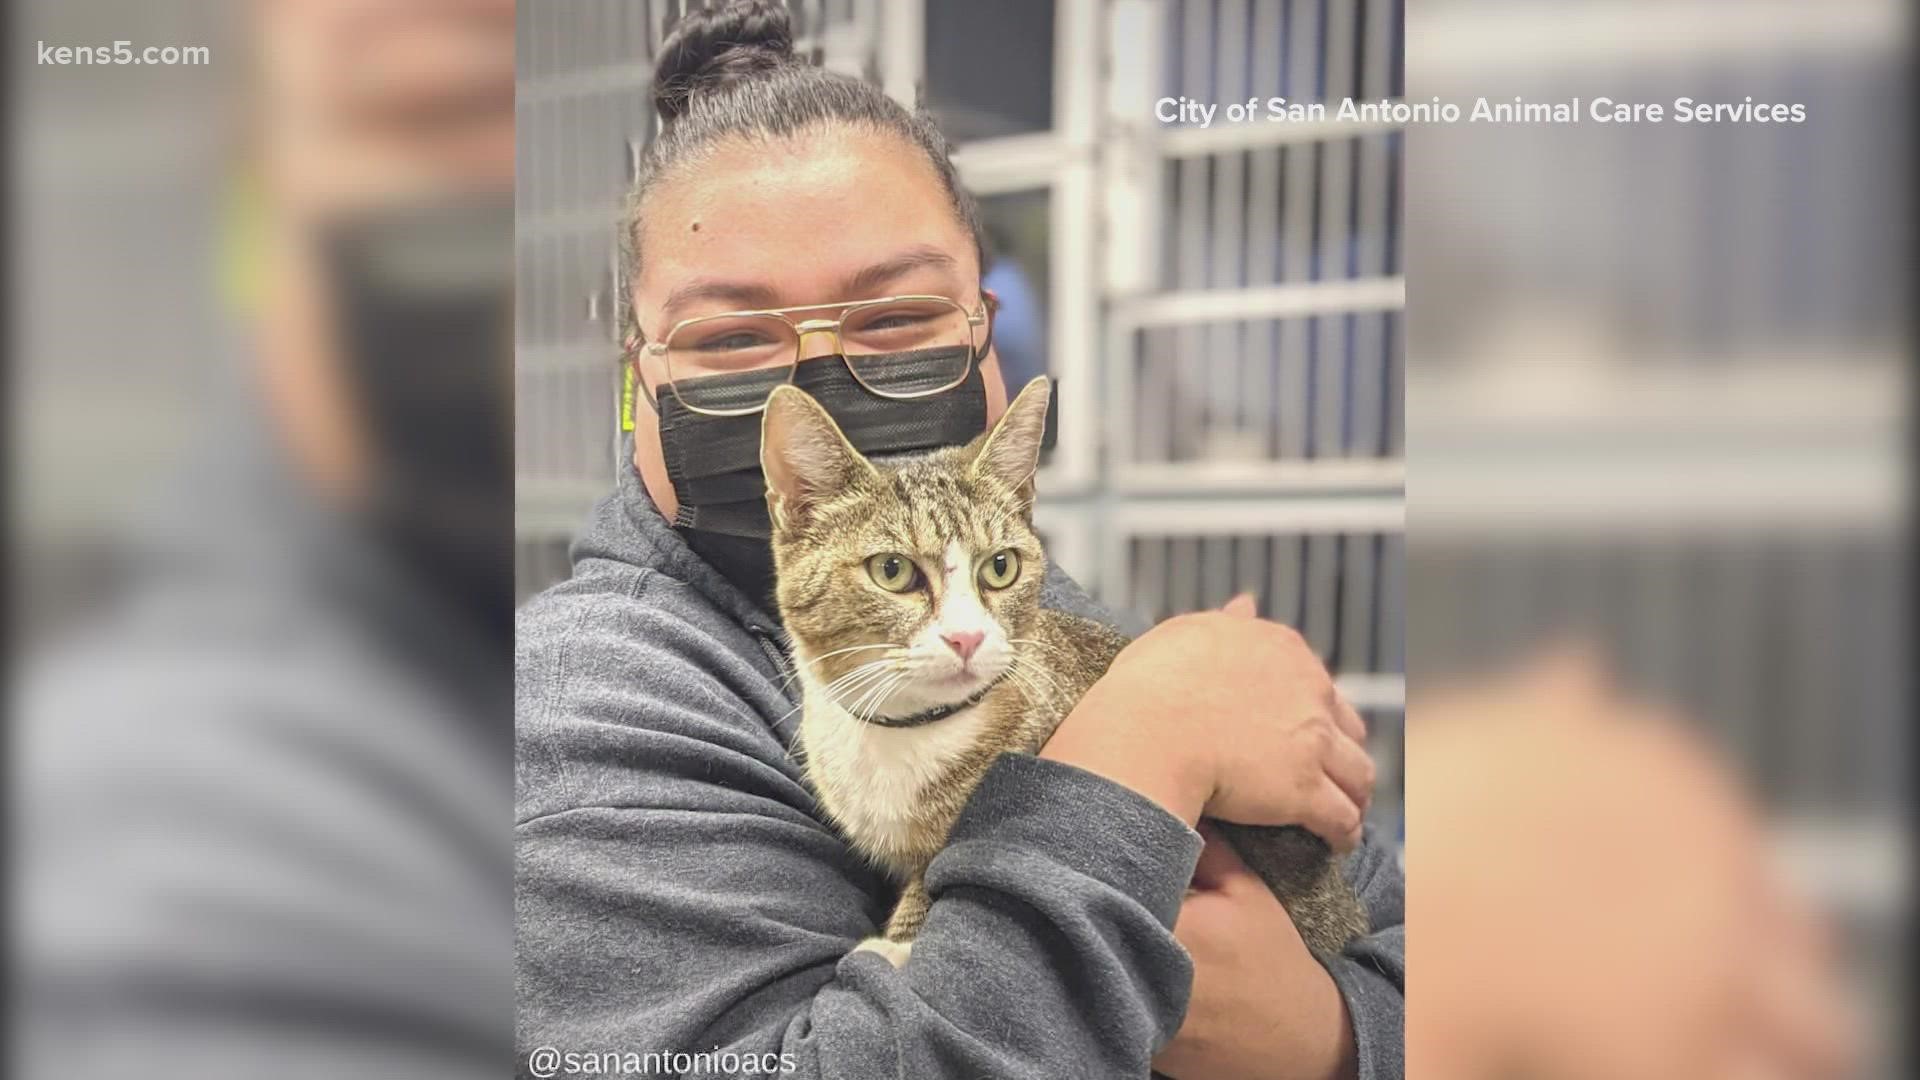 A cat that wandered away from home in 2015 was discovered by Animal Care Services, which had some leg work to do to find her owner.